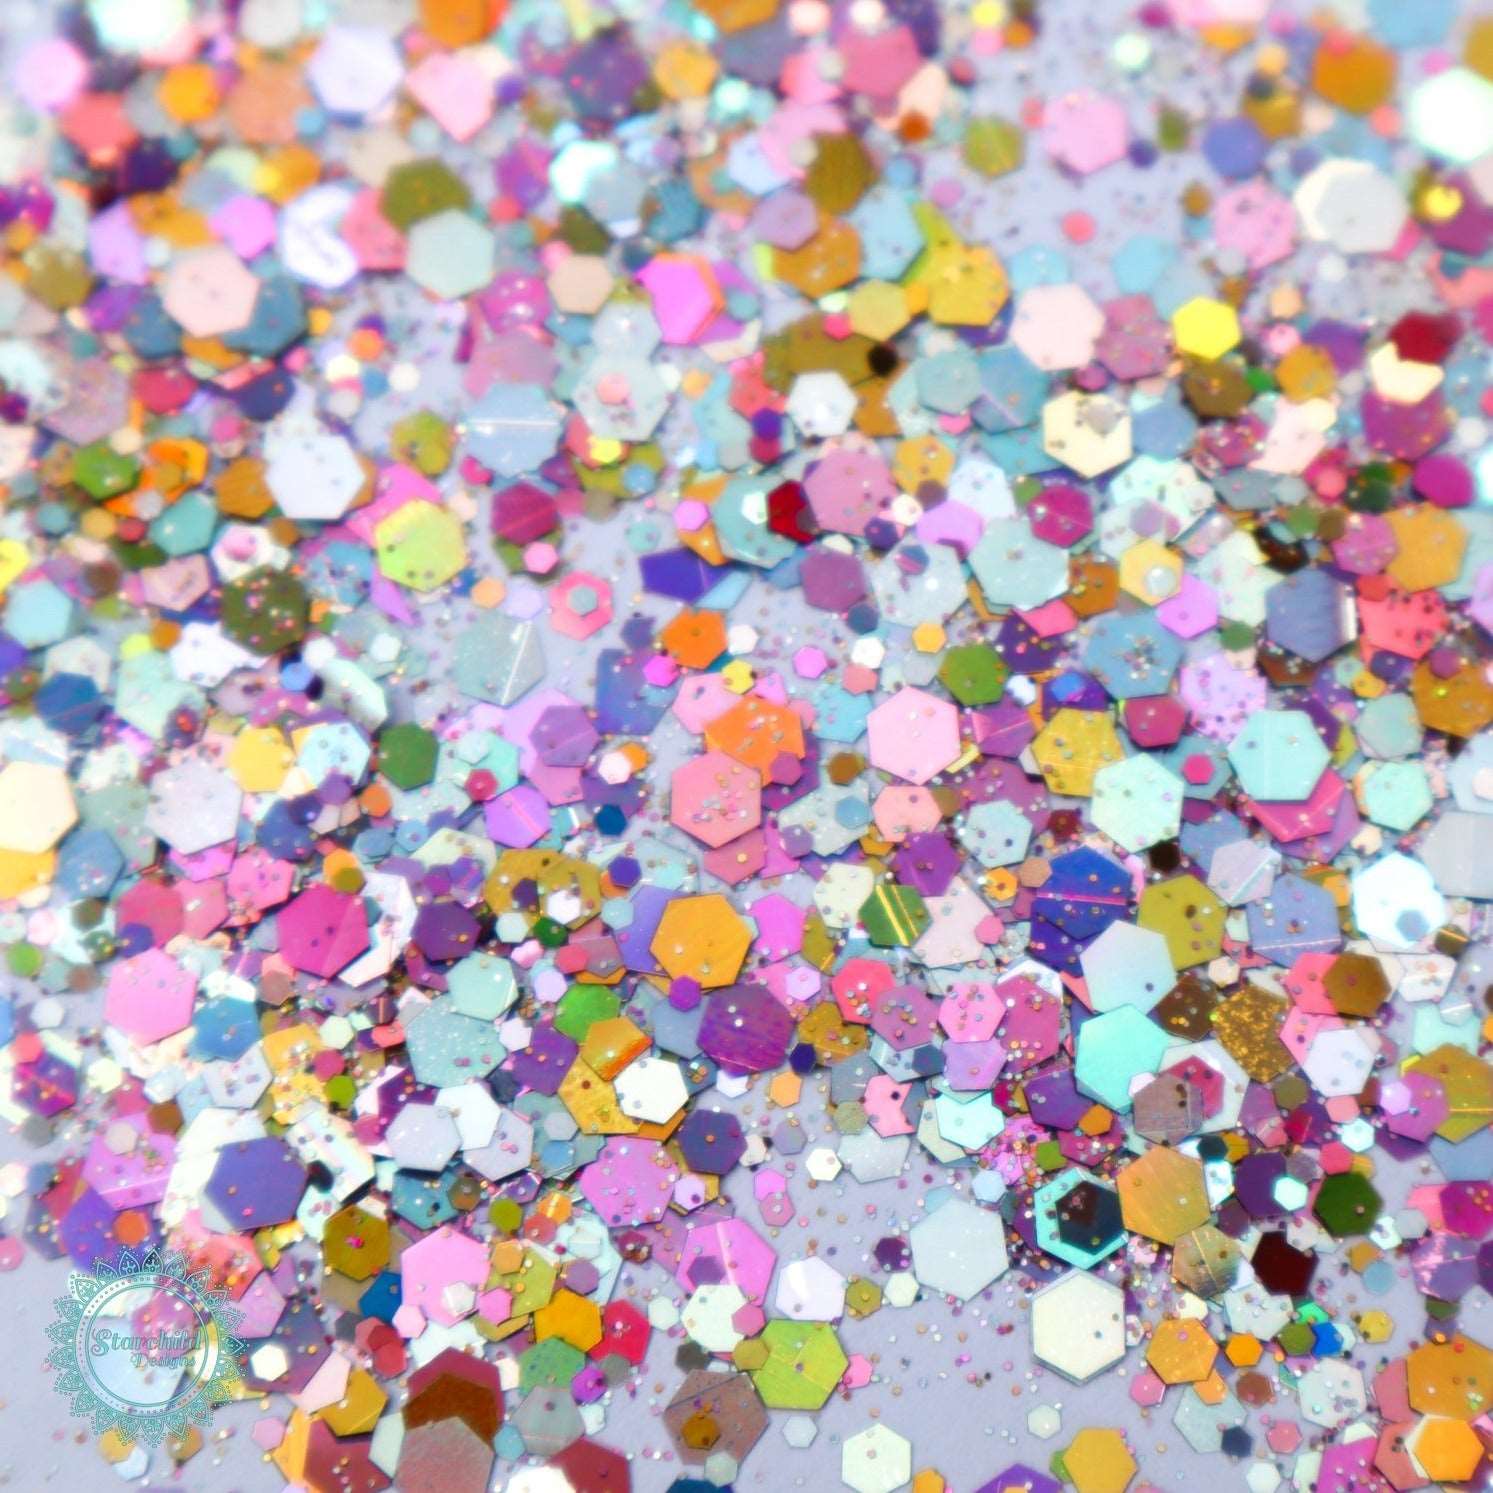 Designs Holographic Resin, Resin Art Decorations Glitter